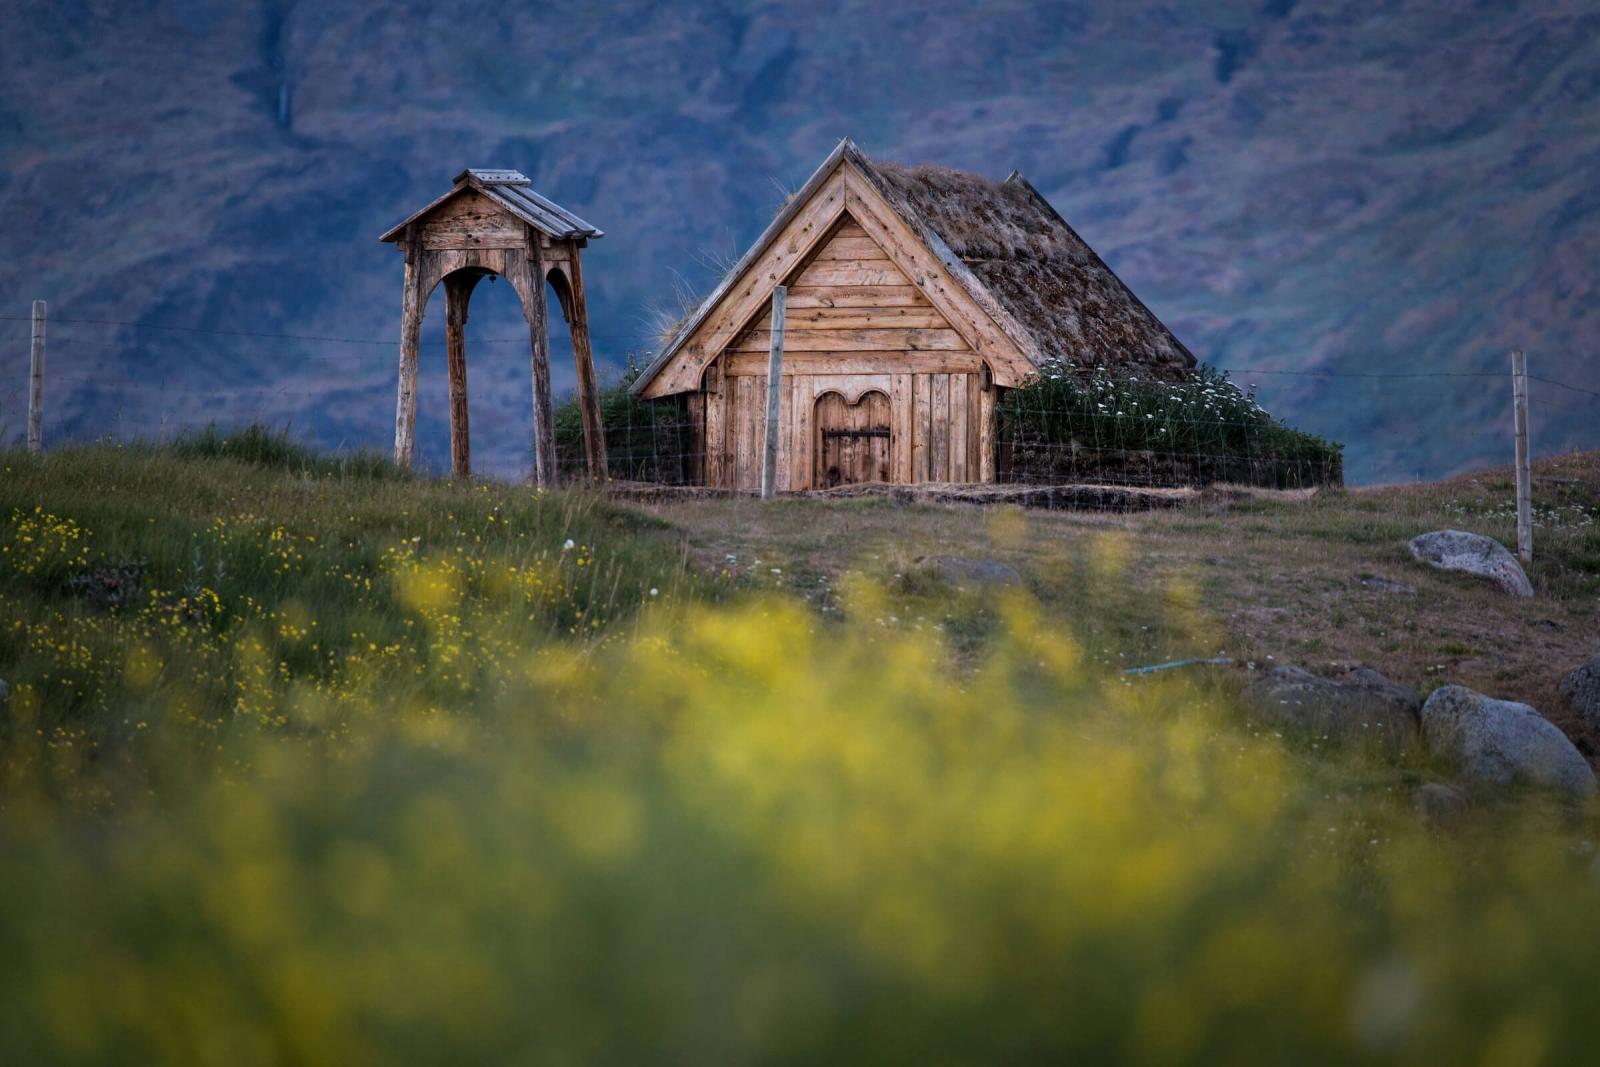 Tjodhilde's Church at the norse reconstruction site in Qassiarsuk in South Greenland. By Mads Pihl